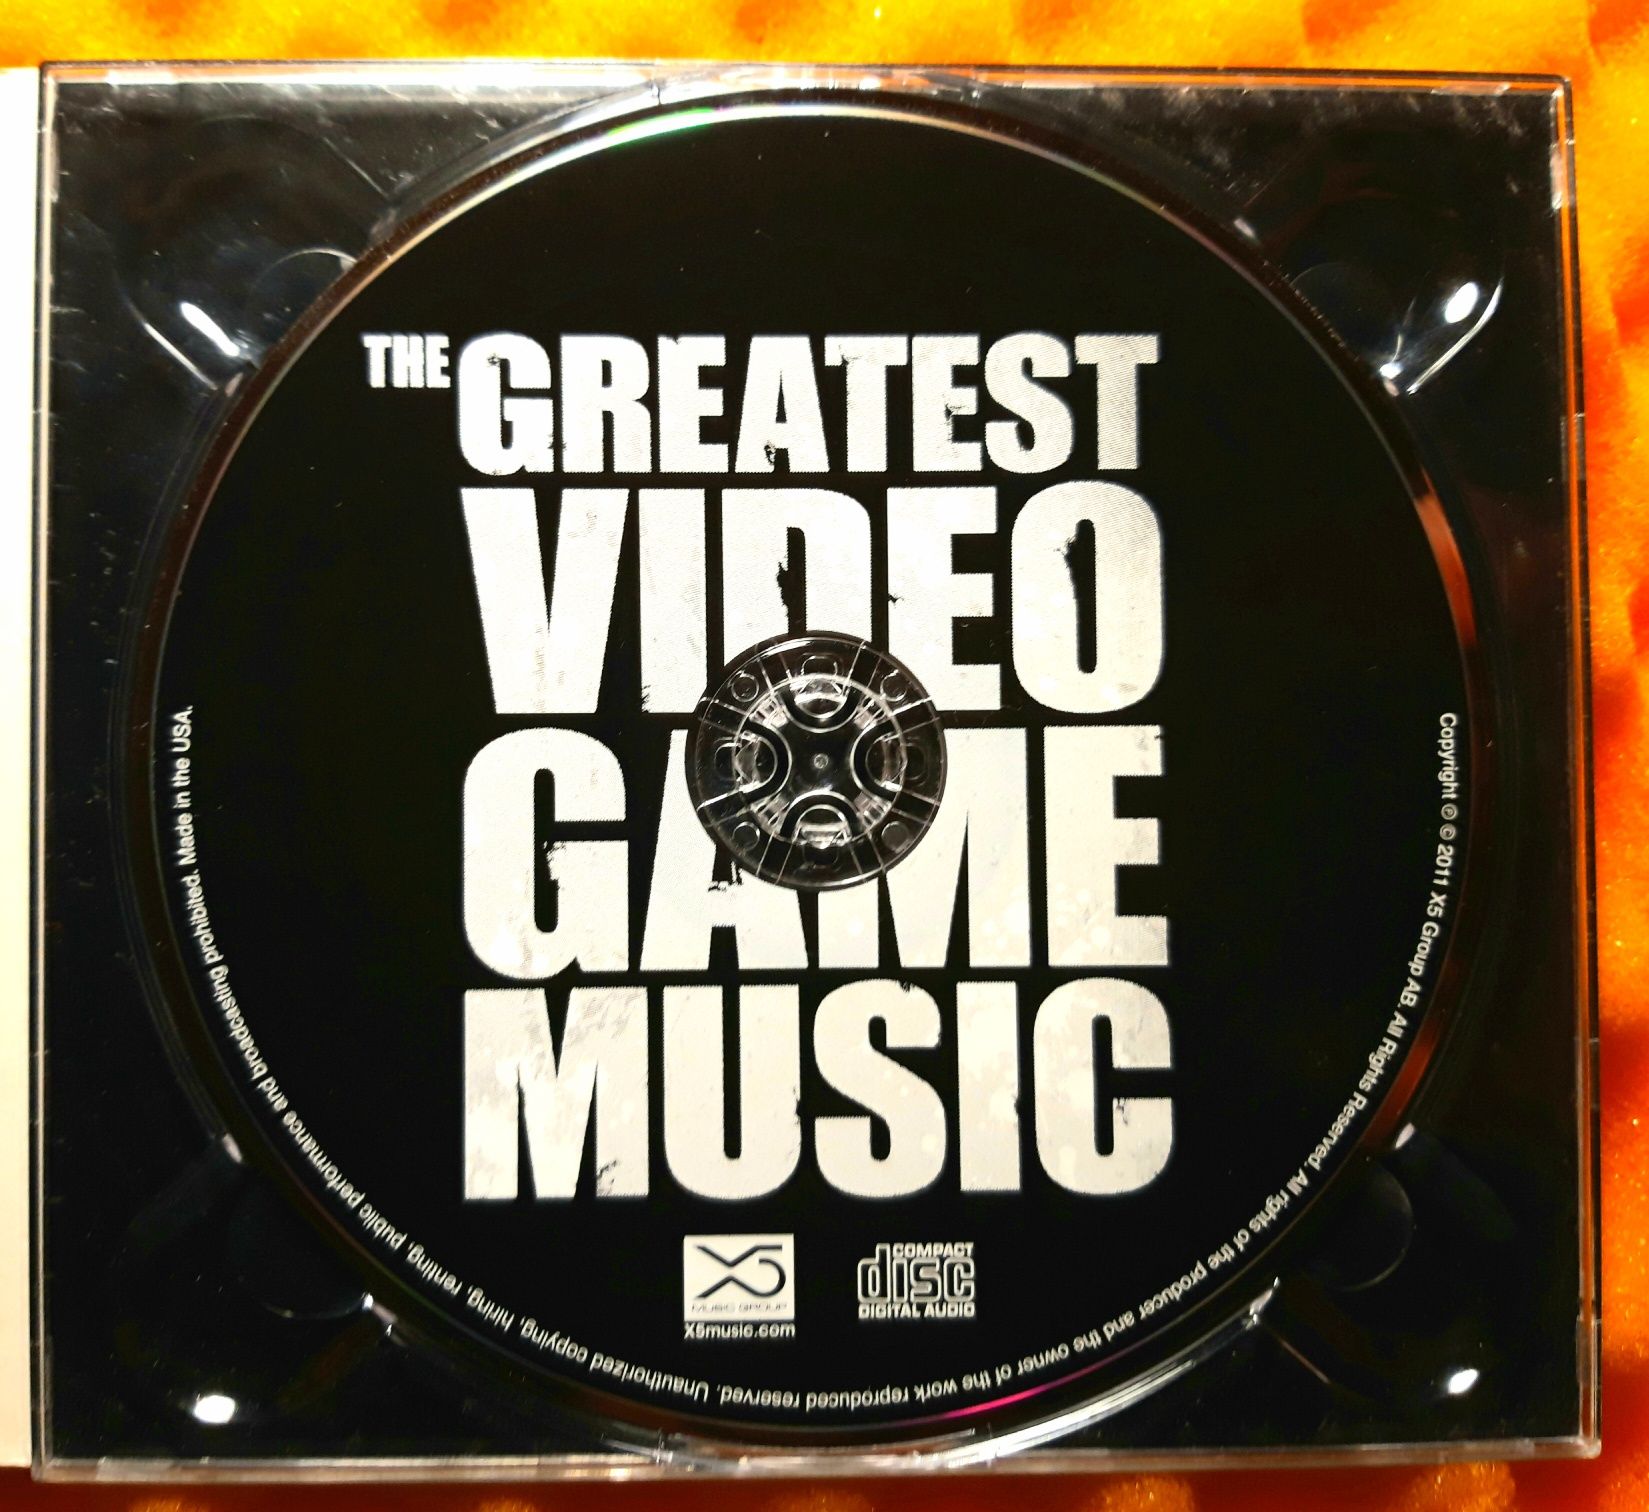 The Greatest Video Game Music (CD, 2011)